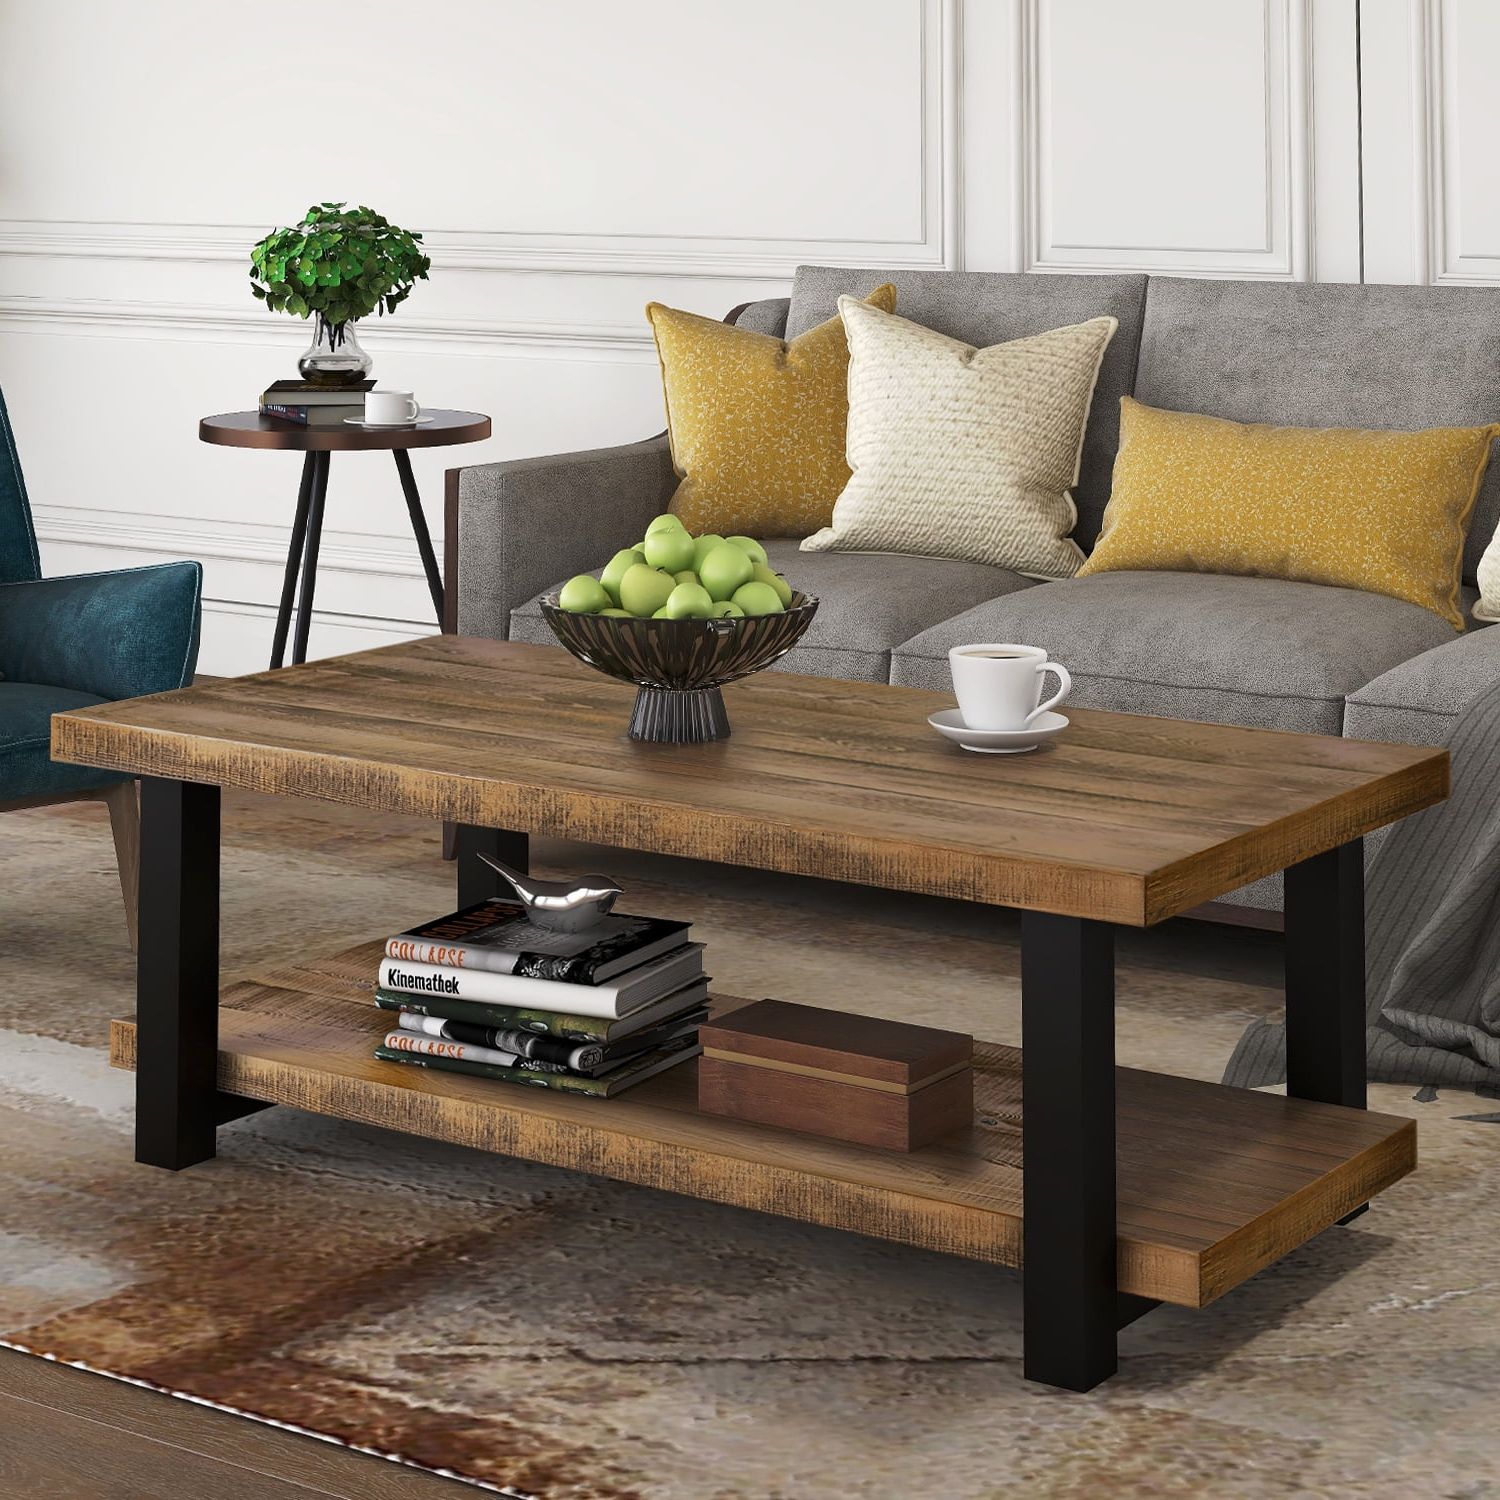 Topcobe Rustic Natural Coffee Table With Storage Shelf, Side End Table Intended For Fashionable Coffee Tables With Storage (View 5 of 15)